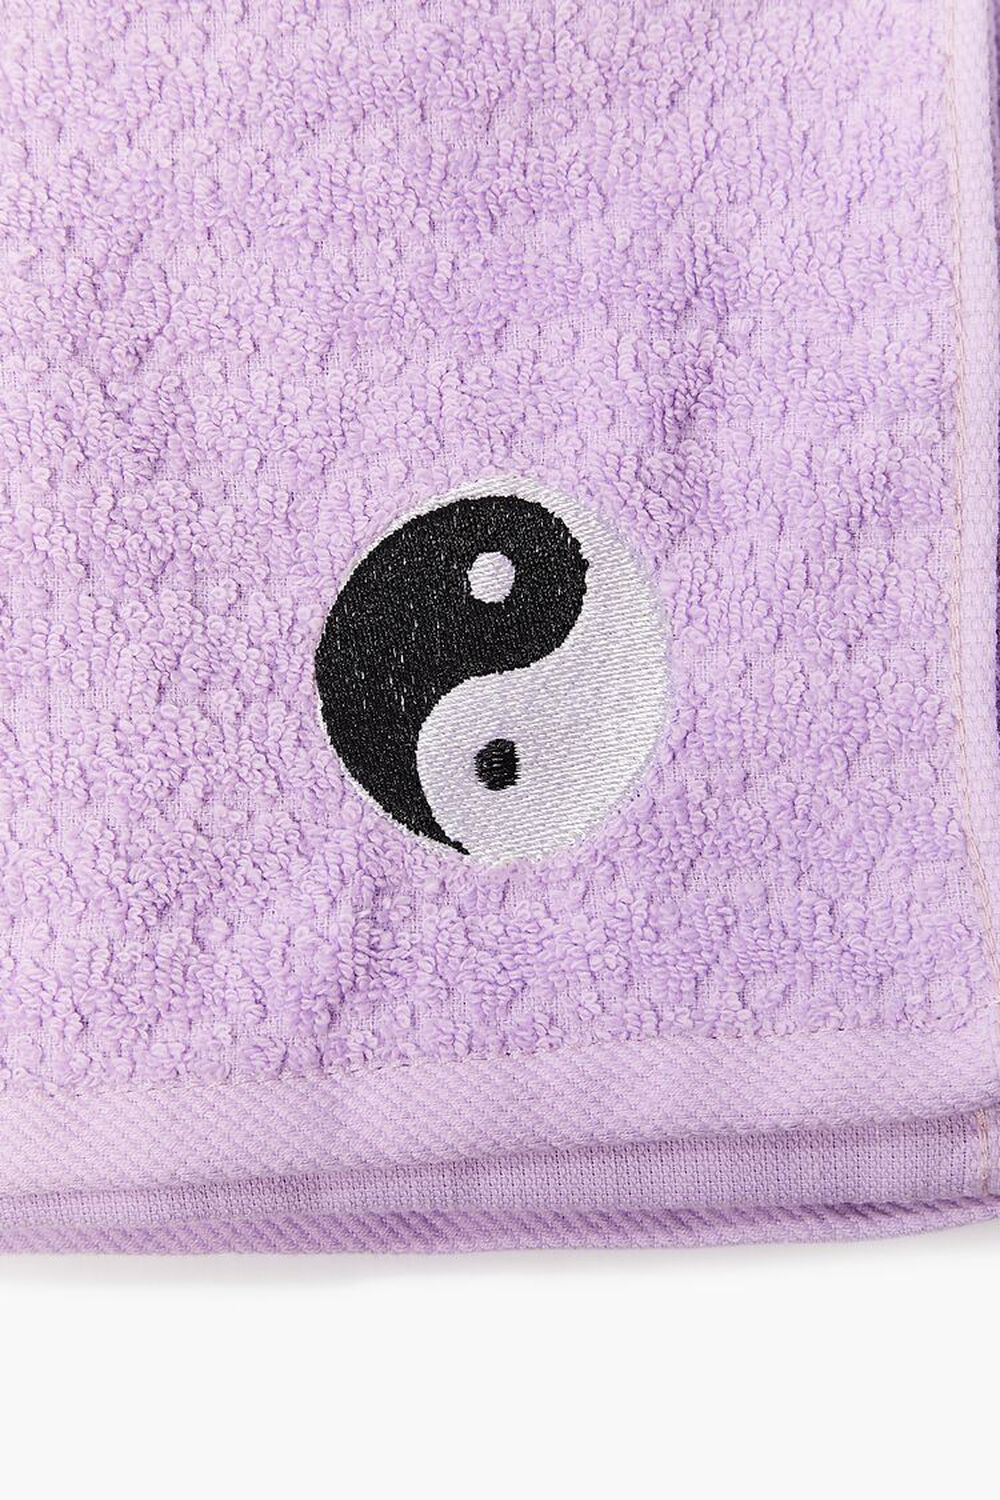 LAVENDER Embroidered Yin Yang Hand Towel, image 3